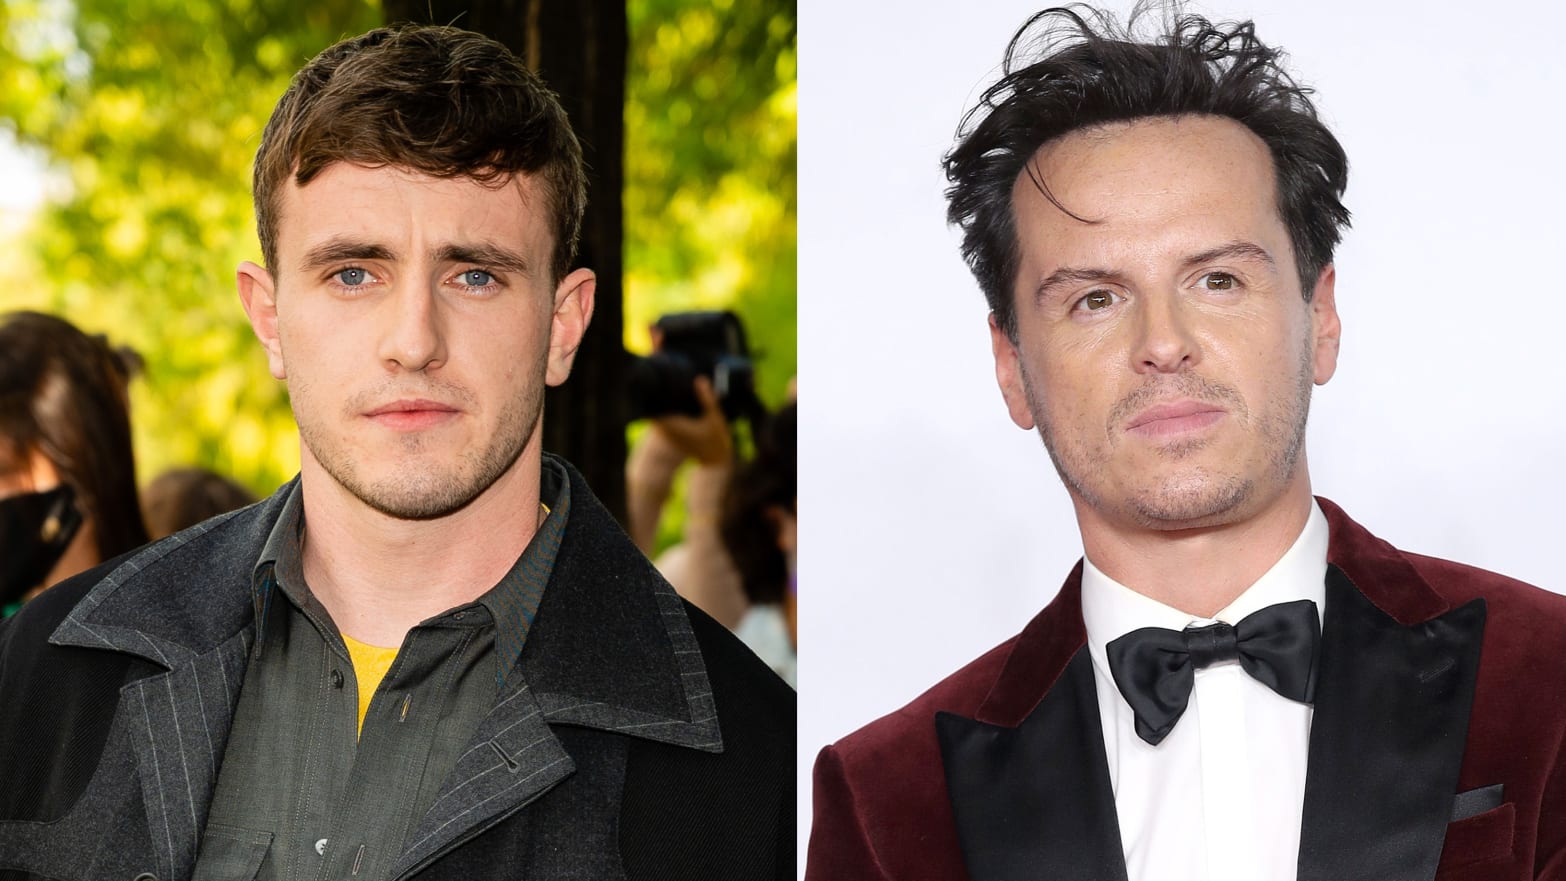 Side-by-side images of Paul Mescal and Andrew Scott